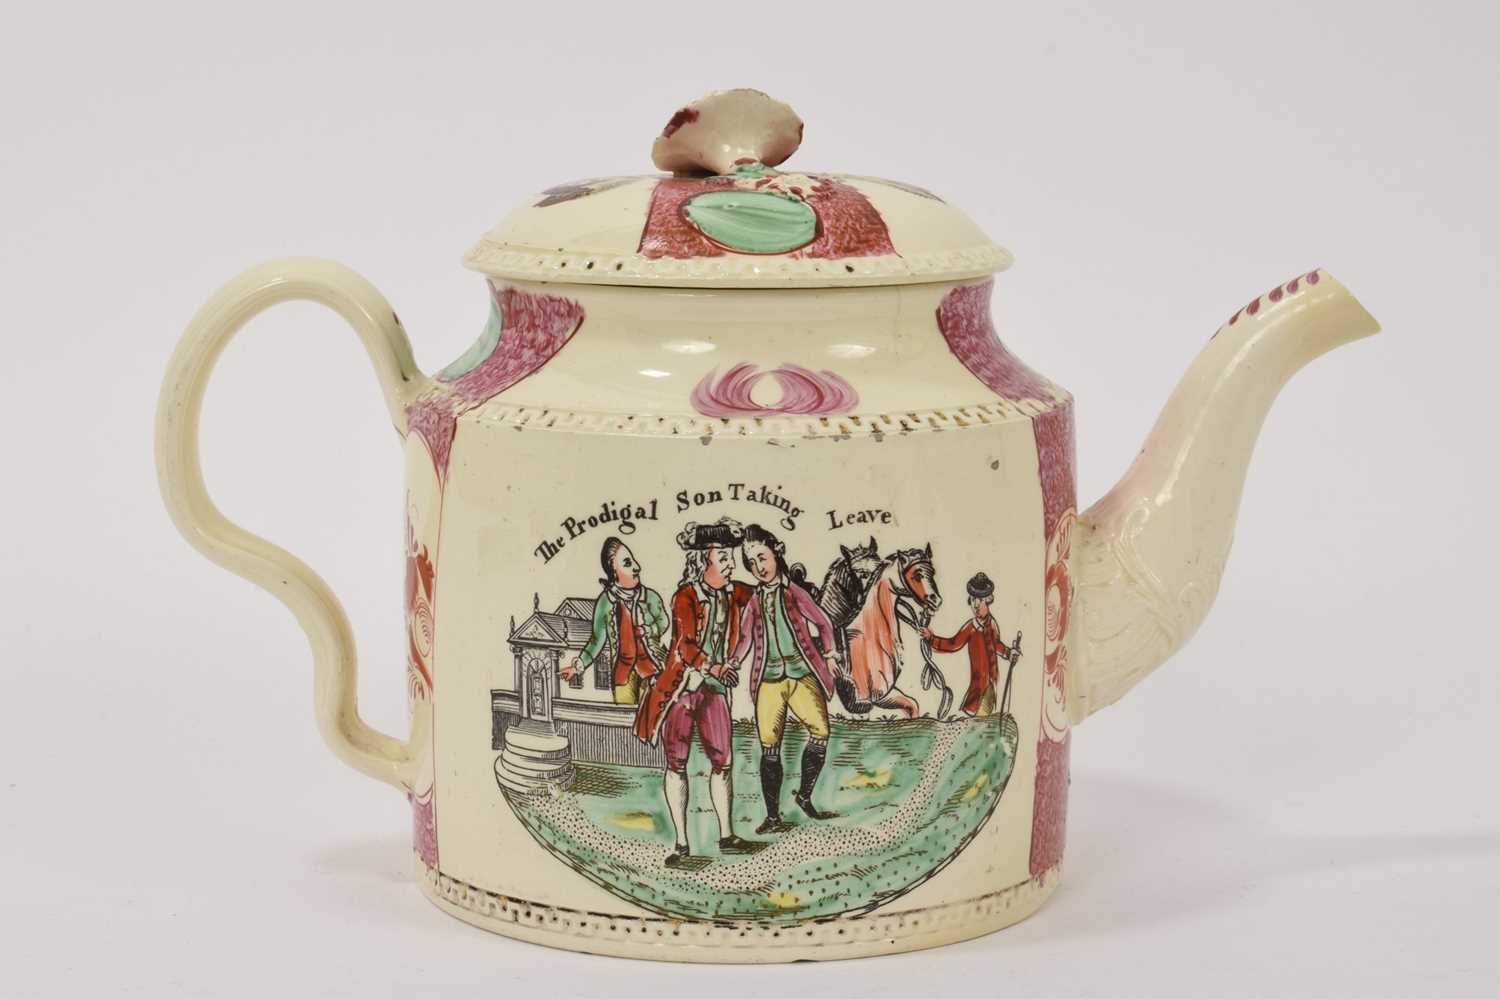 18th century creamware teapot by William Greatbatch - The prodigal son taking leave - Image 3 of 8